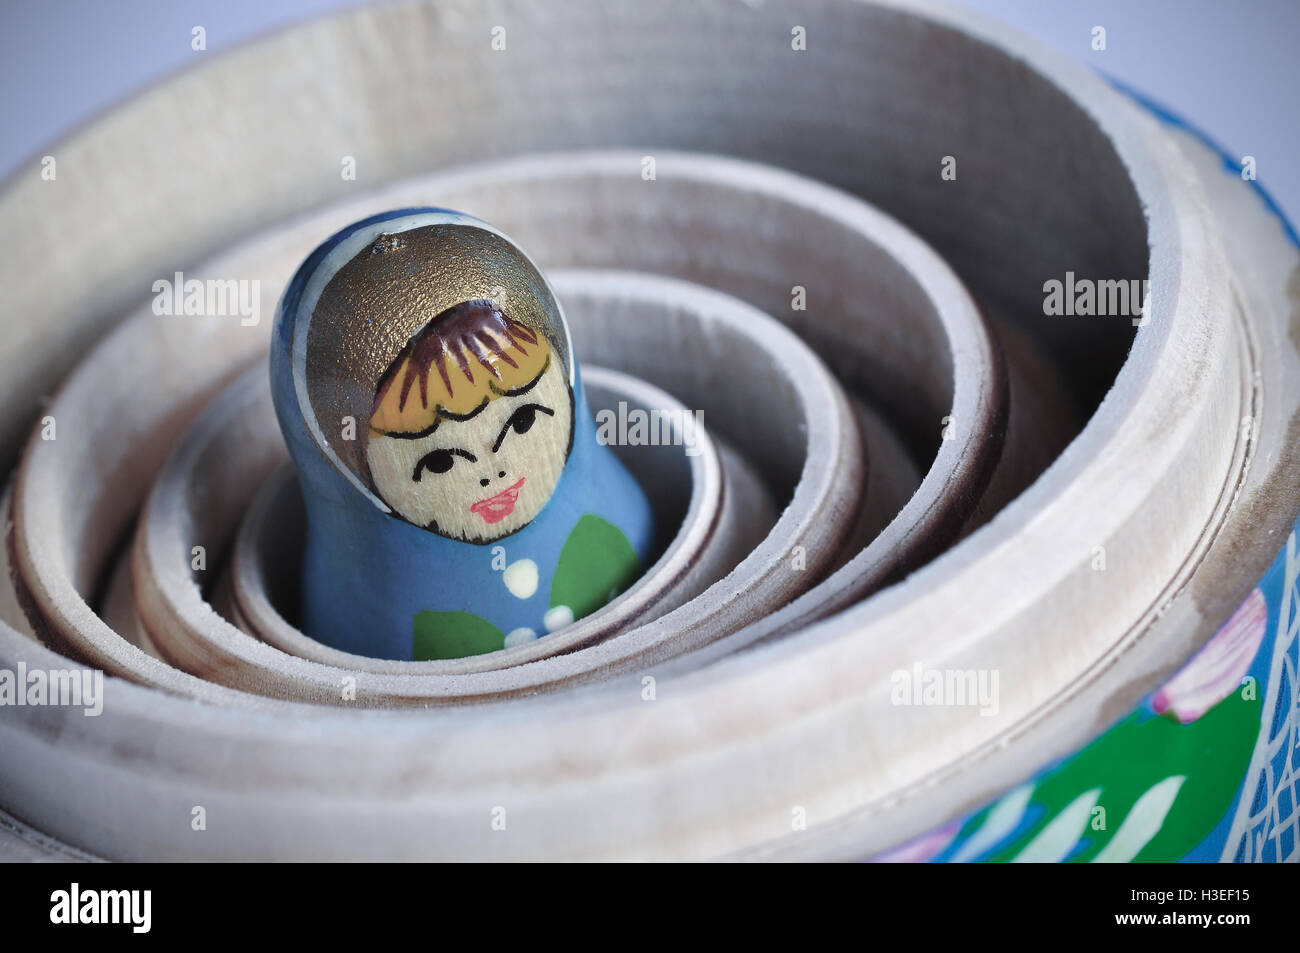 The smallest of the Matrioska Russian Dolls, inside the others Stock Photo